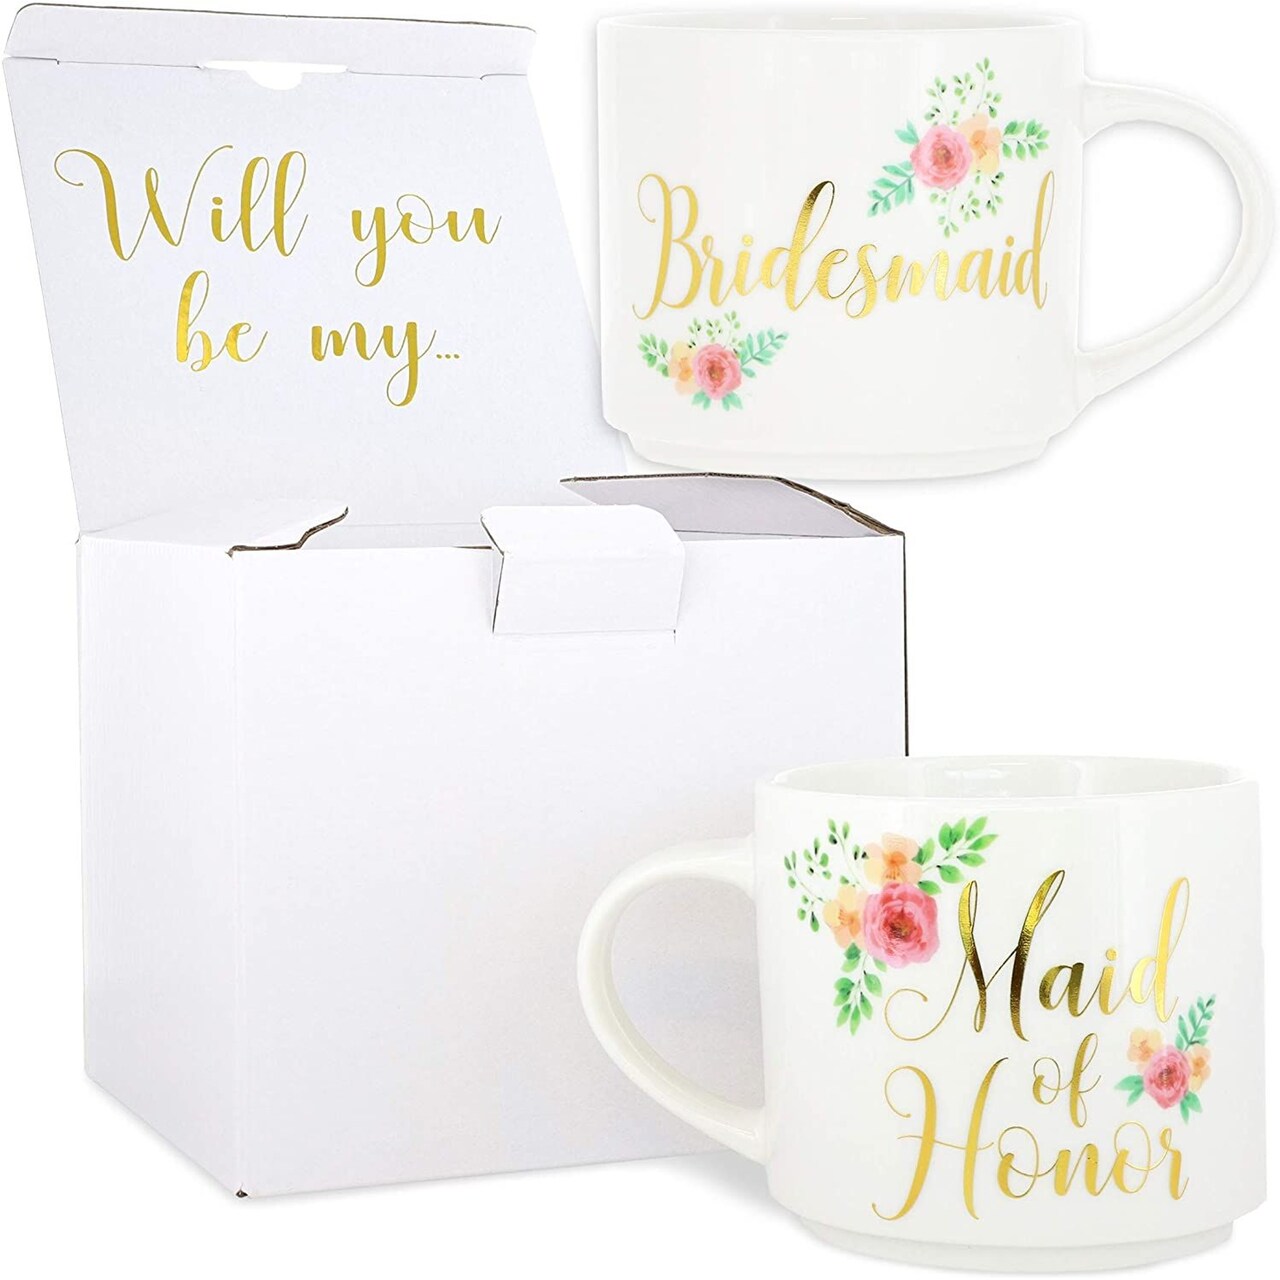 Floral Stackable Coffee Mugs, Maid of Honor and Bridesmaid (15 oz